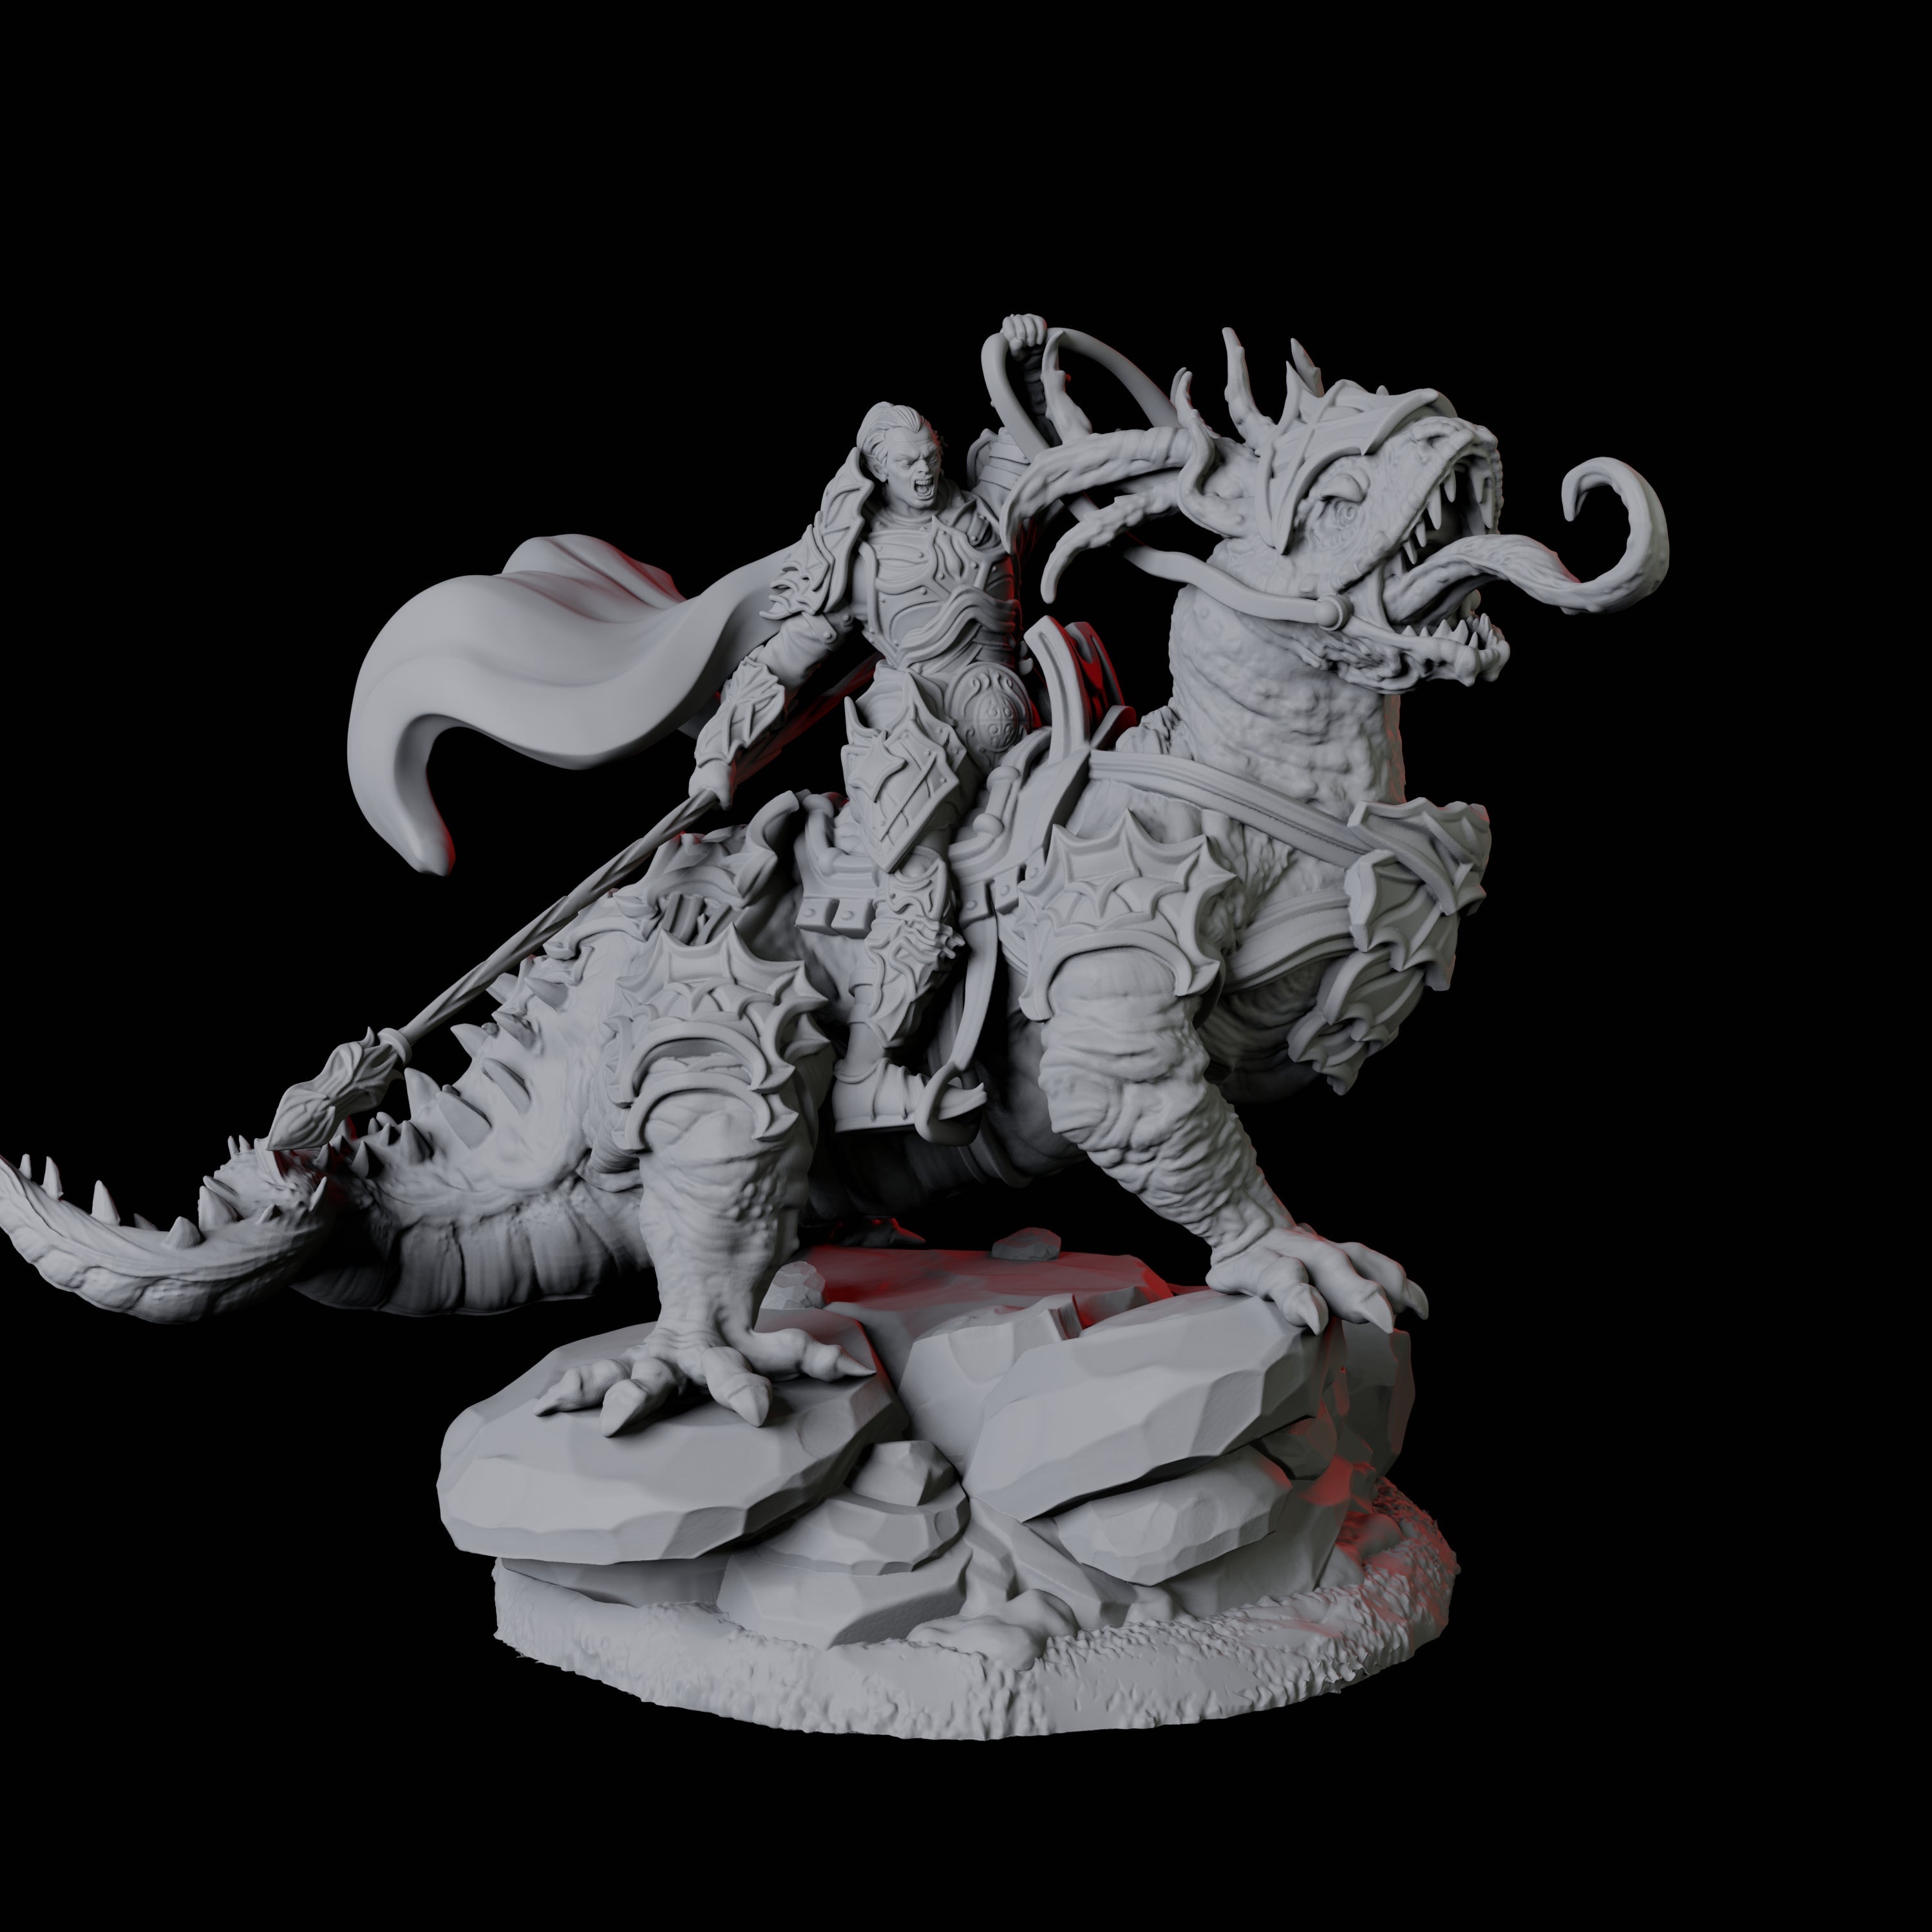 Four Fighters mounted on Giant Lizards Miniature for Dungeons and Dragons, Pathfinder or other TTRPGs